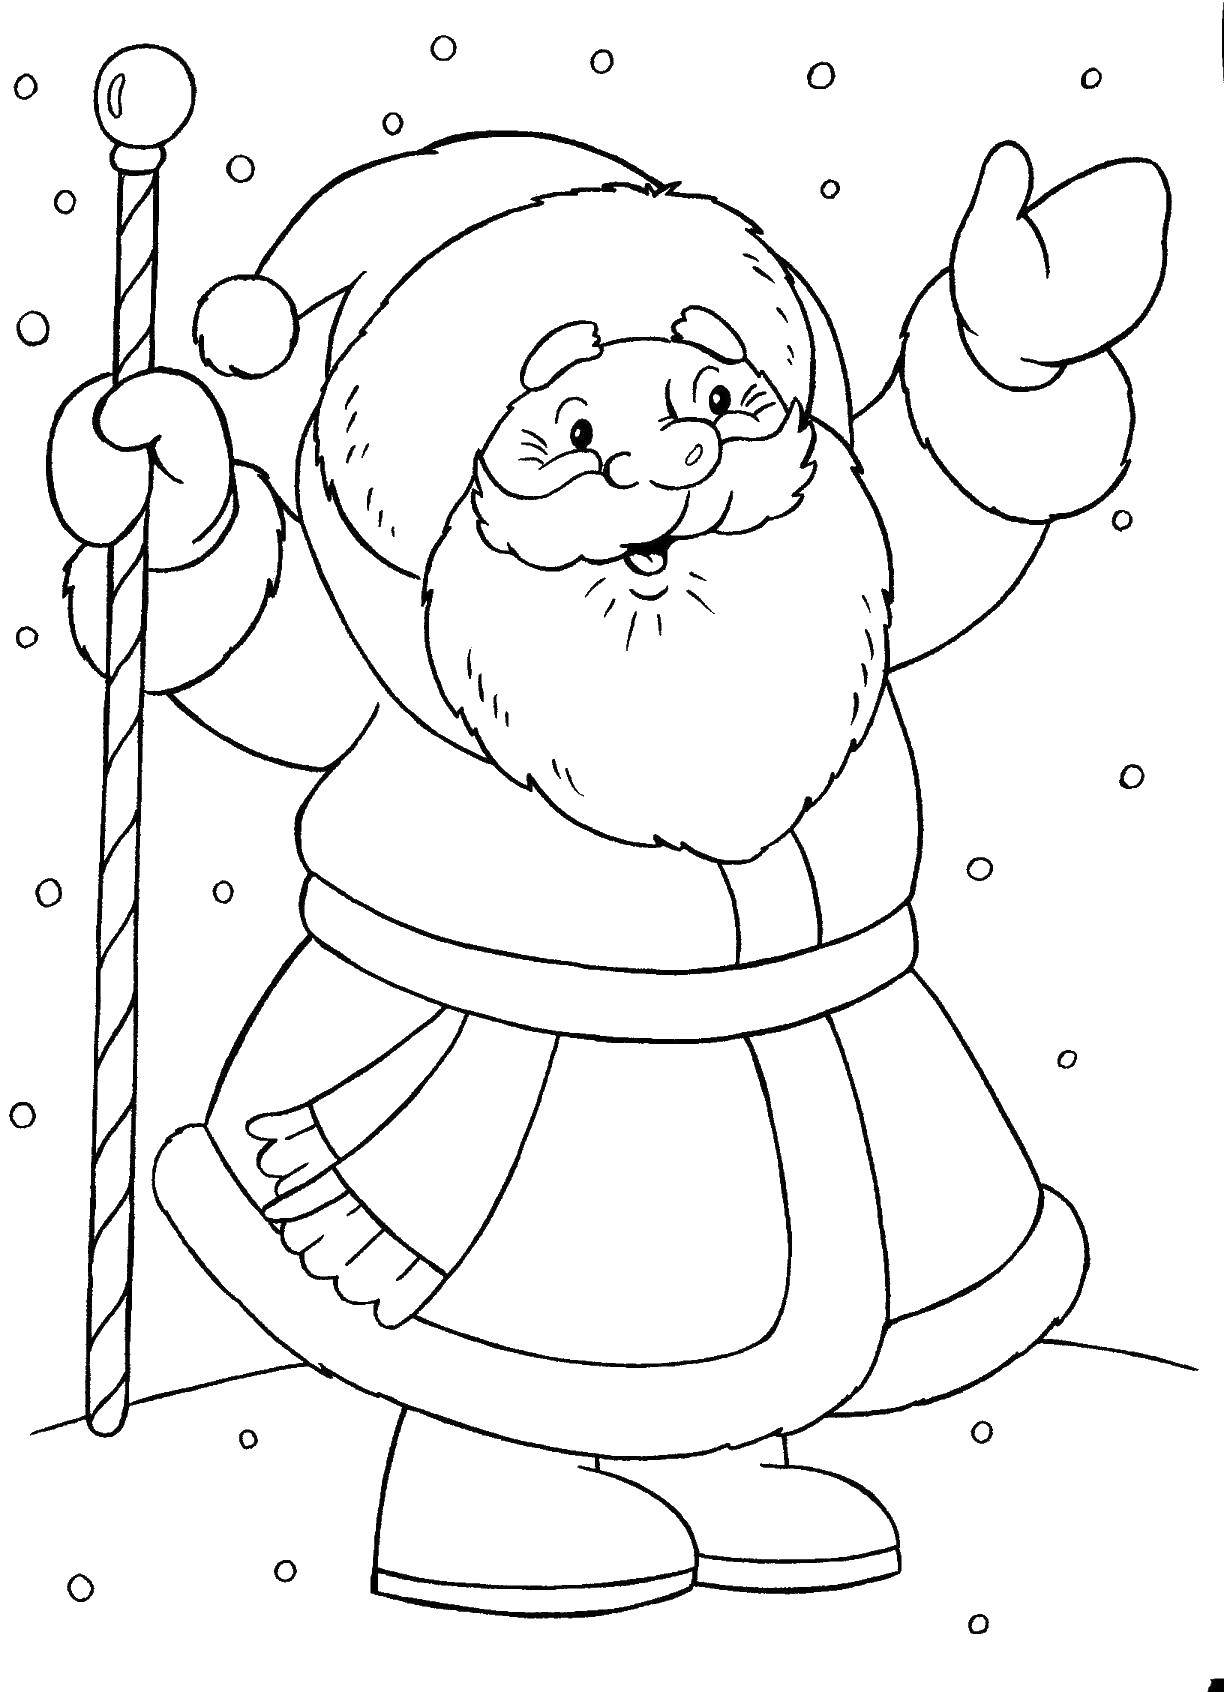 Coloring Cheerful Santa Claus with a stick. Category Santa Claus. Tags:  New Year, Santa Claus.